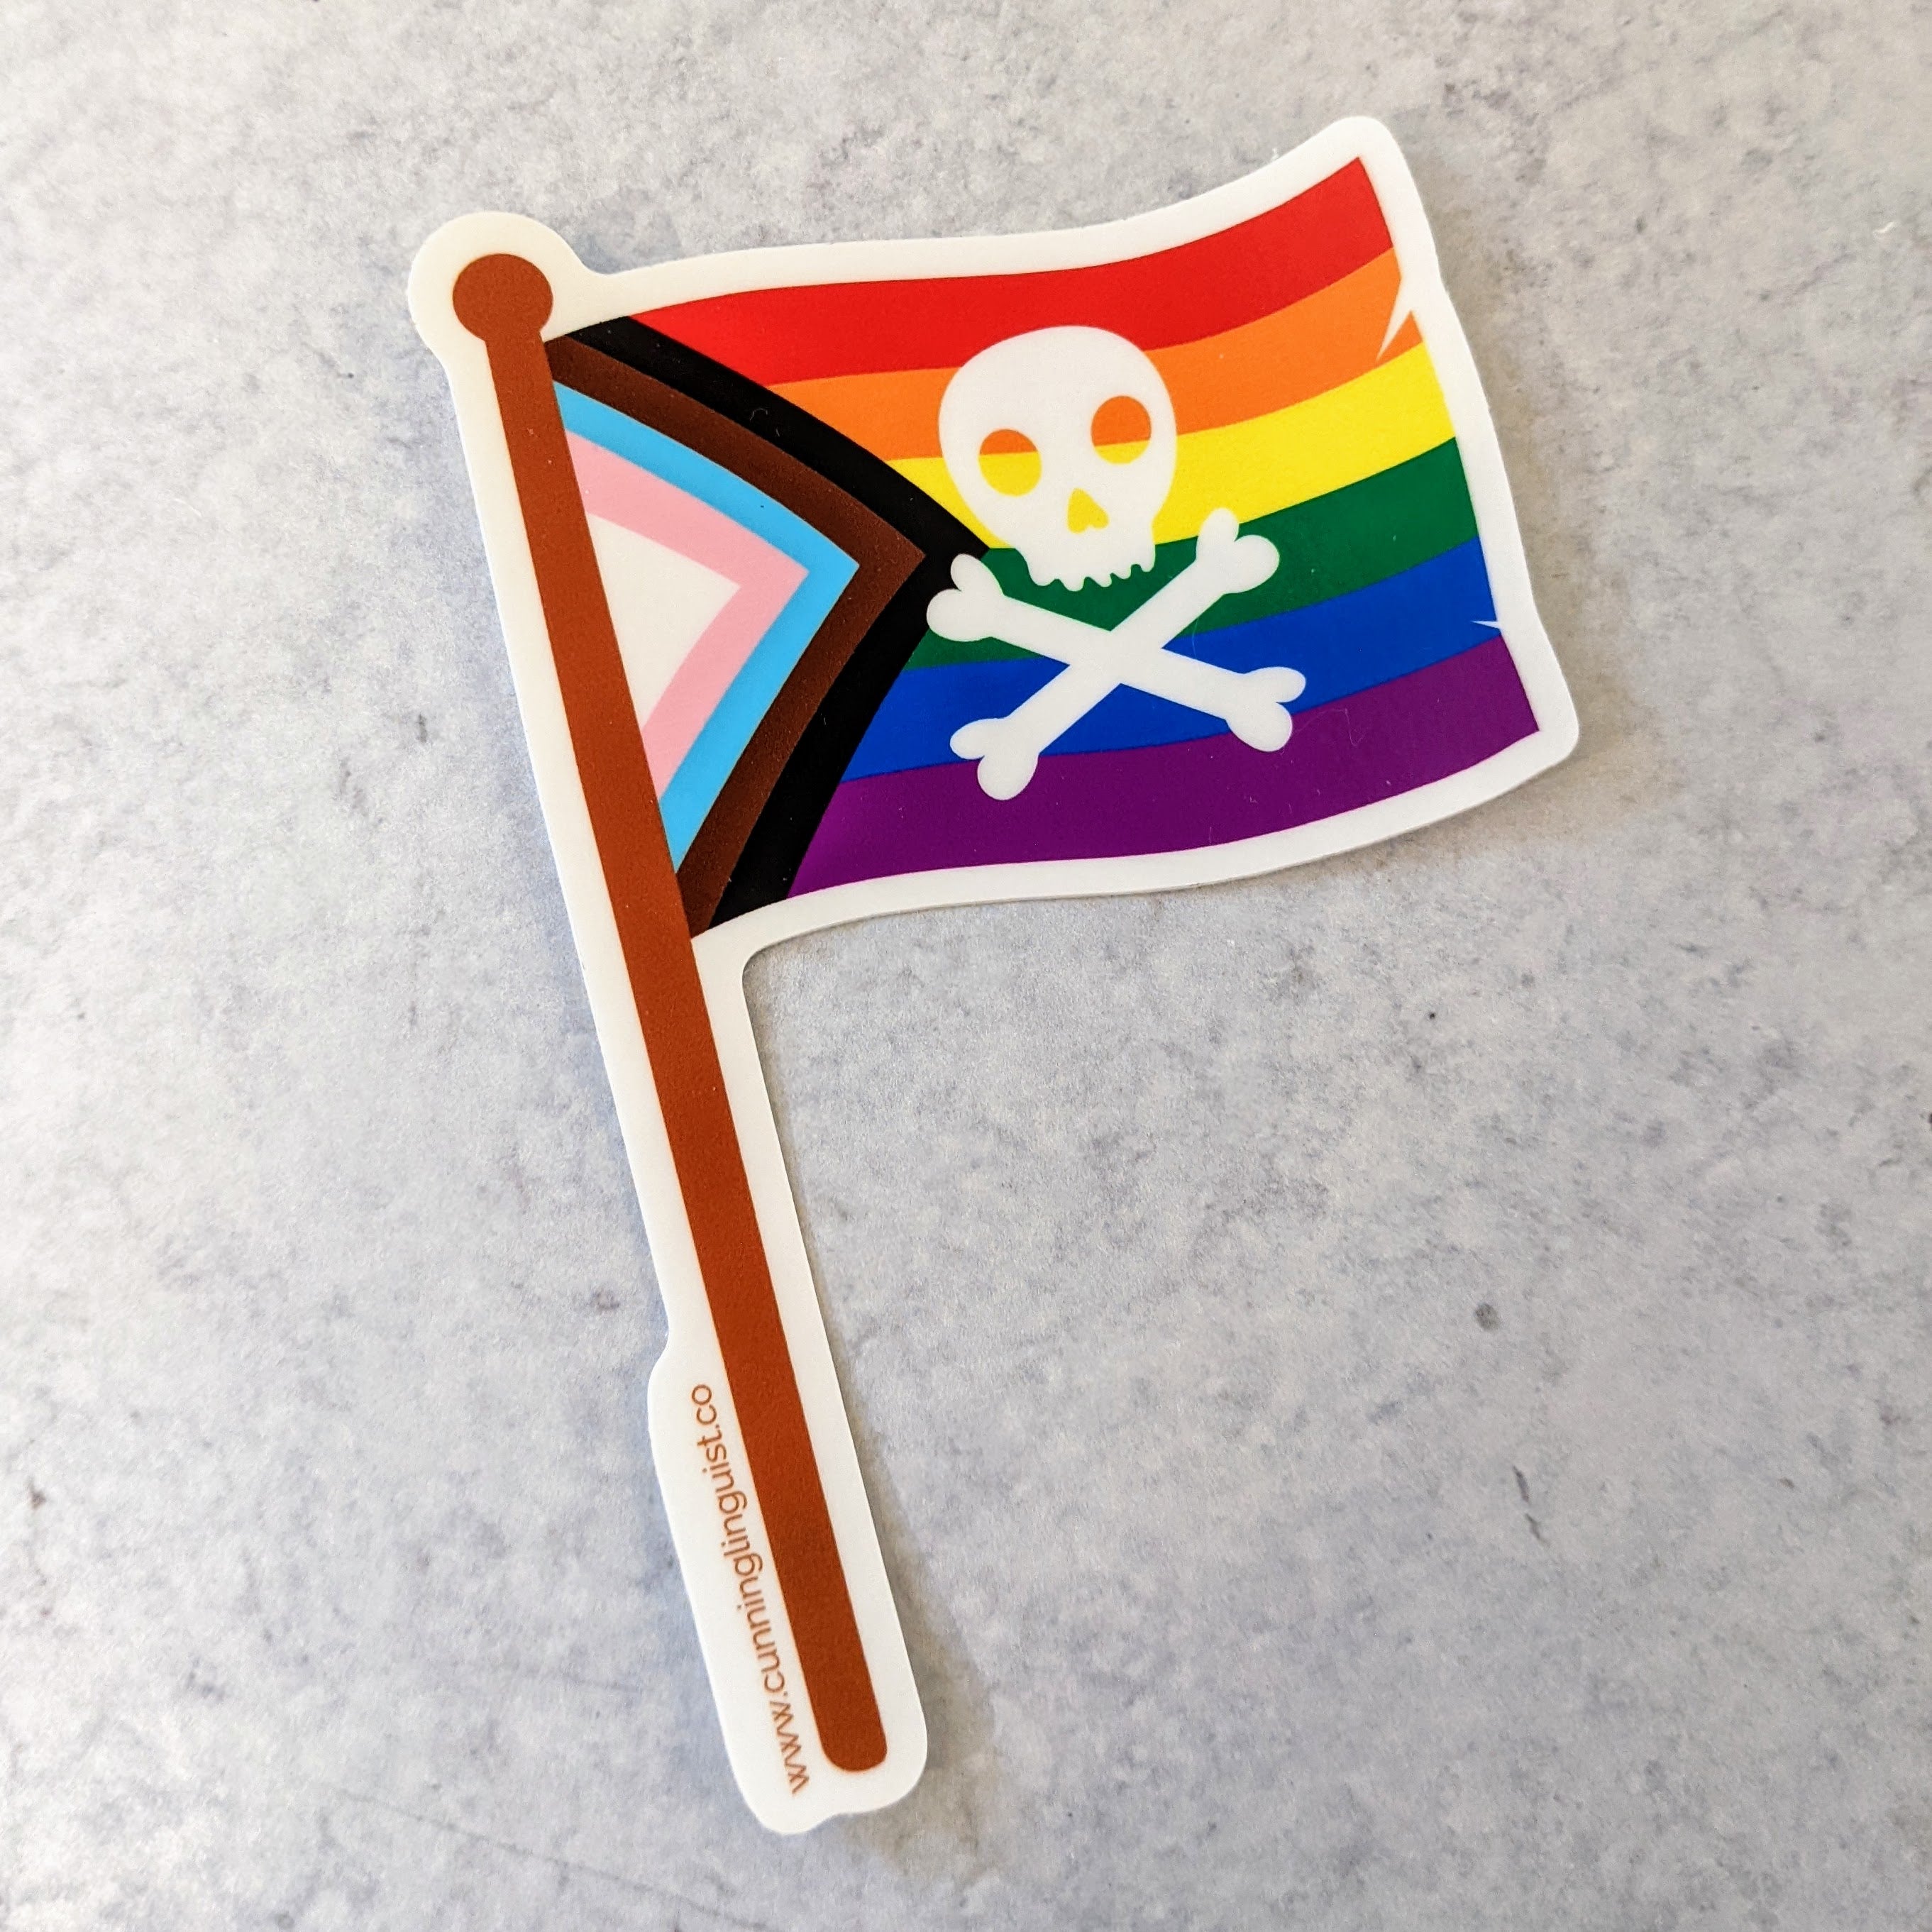 Our Flag Means Pride sticker-2